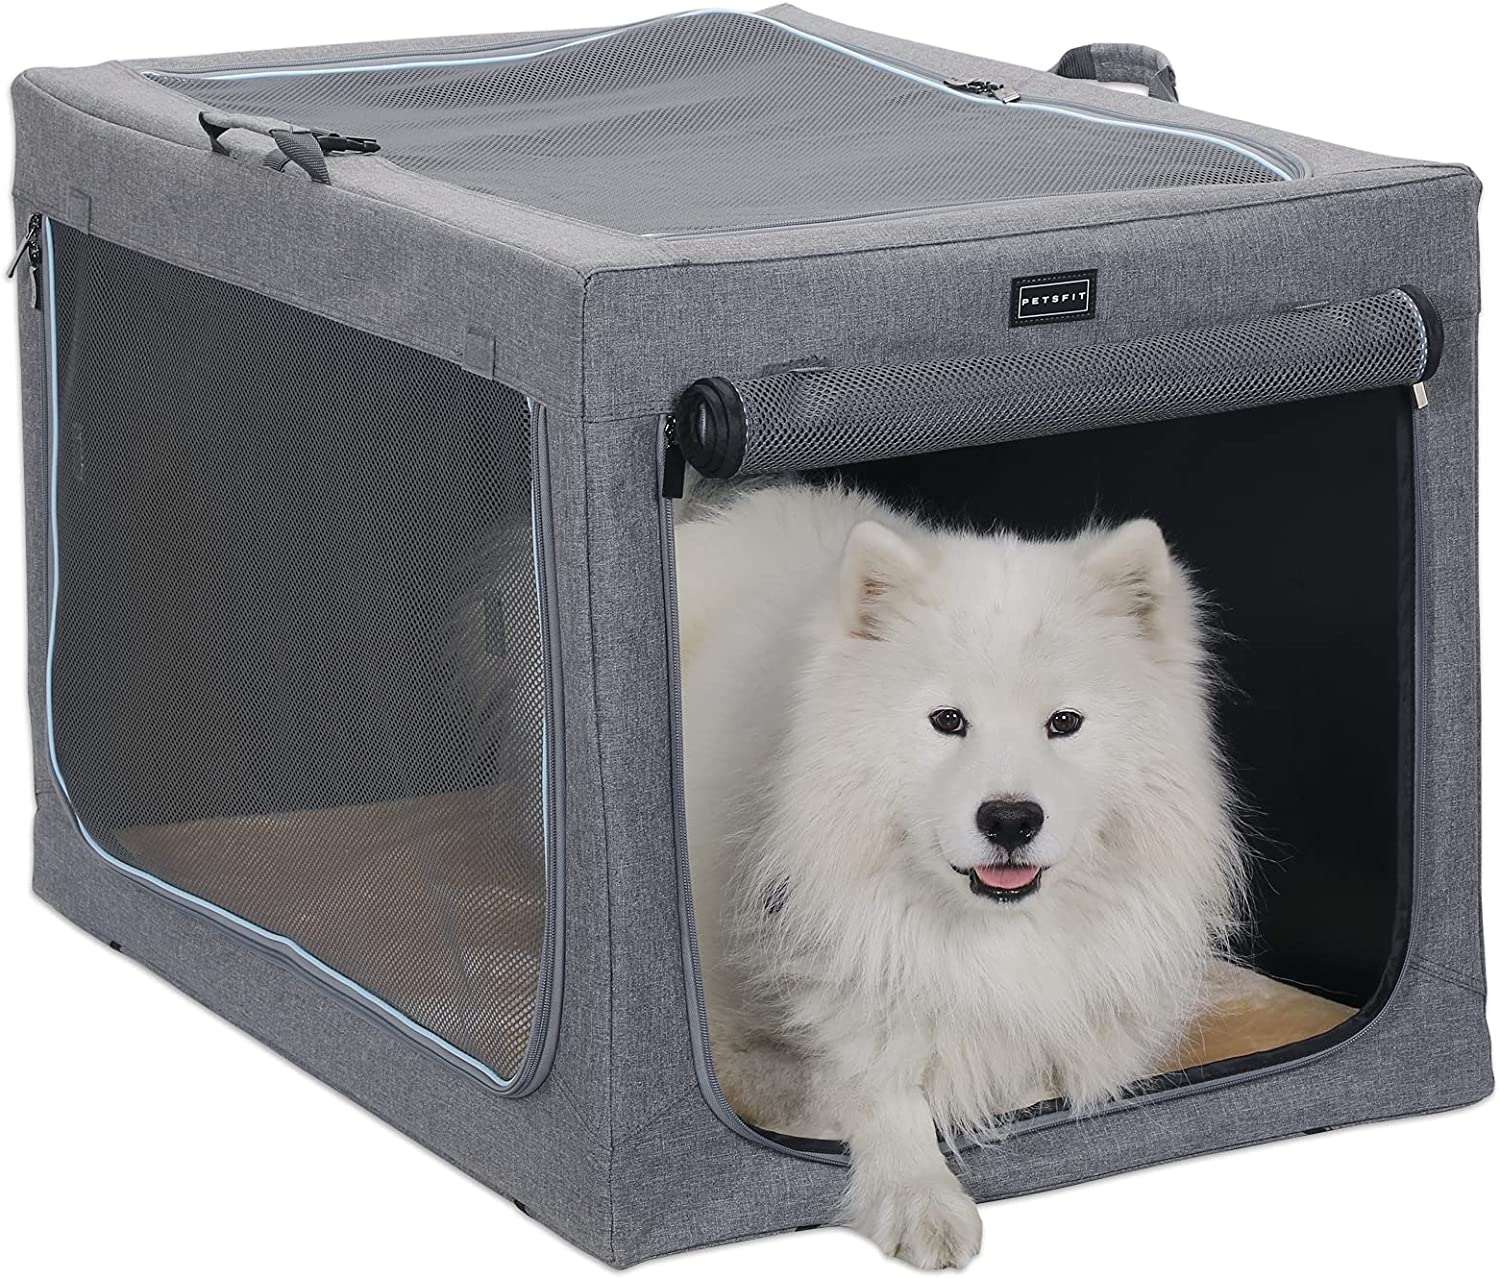 Petsfit-Travel-Collapsible-Soft-Dog-Crate-10